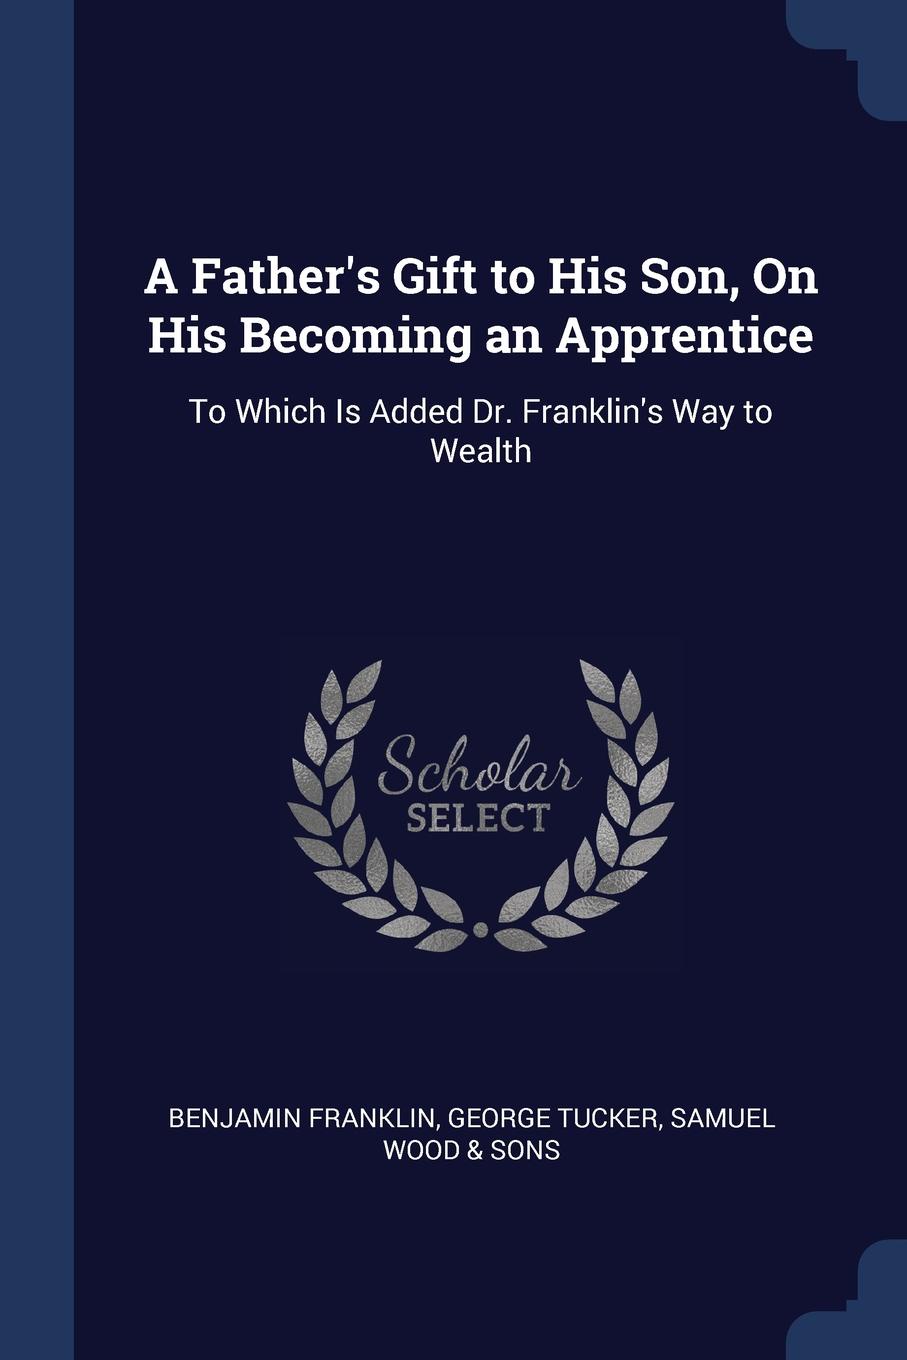 A Father.s Gift to His Son, On His Becoming an Apprentice. To Which Is Added Dr. Franklin.s Way to Wealth